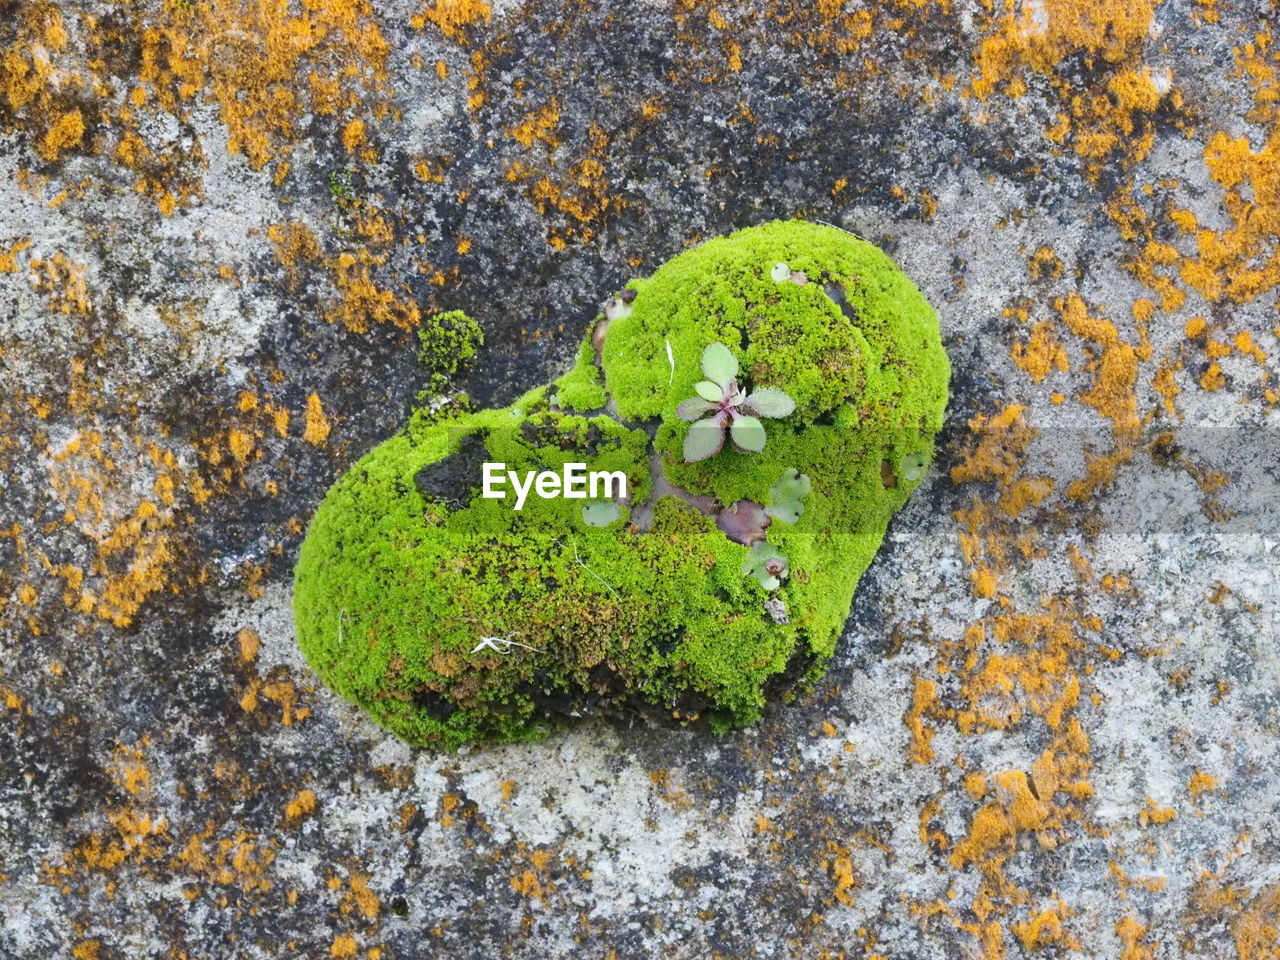 HIGH ANGLE VIEW OF LICHEN ON MOSS GROWING ON PLANT